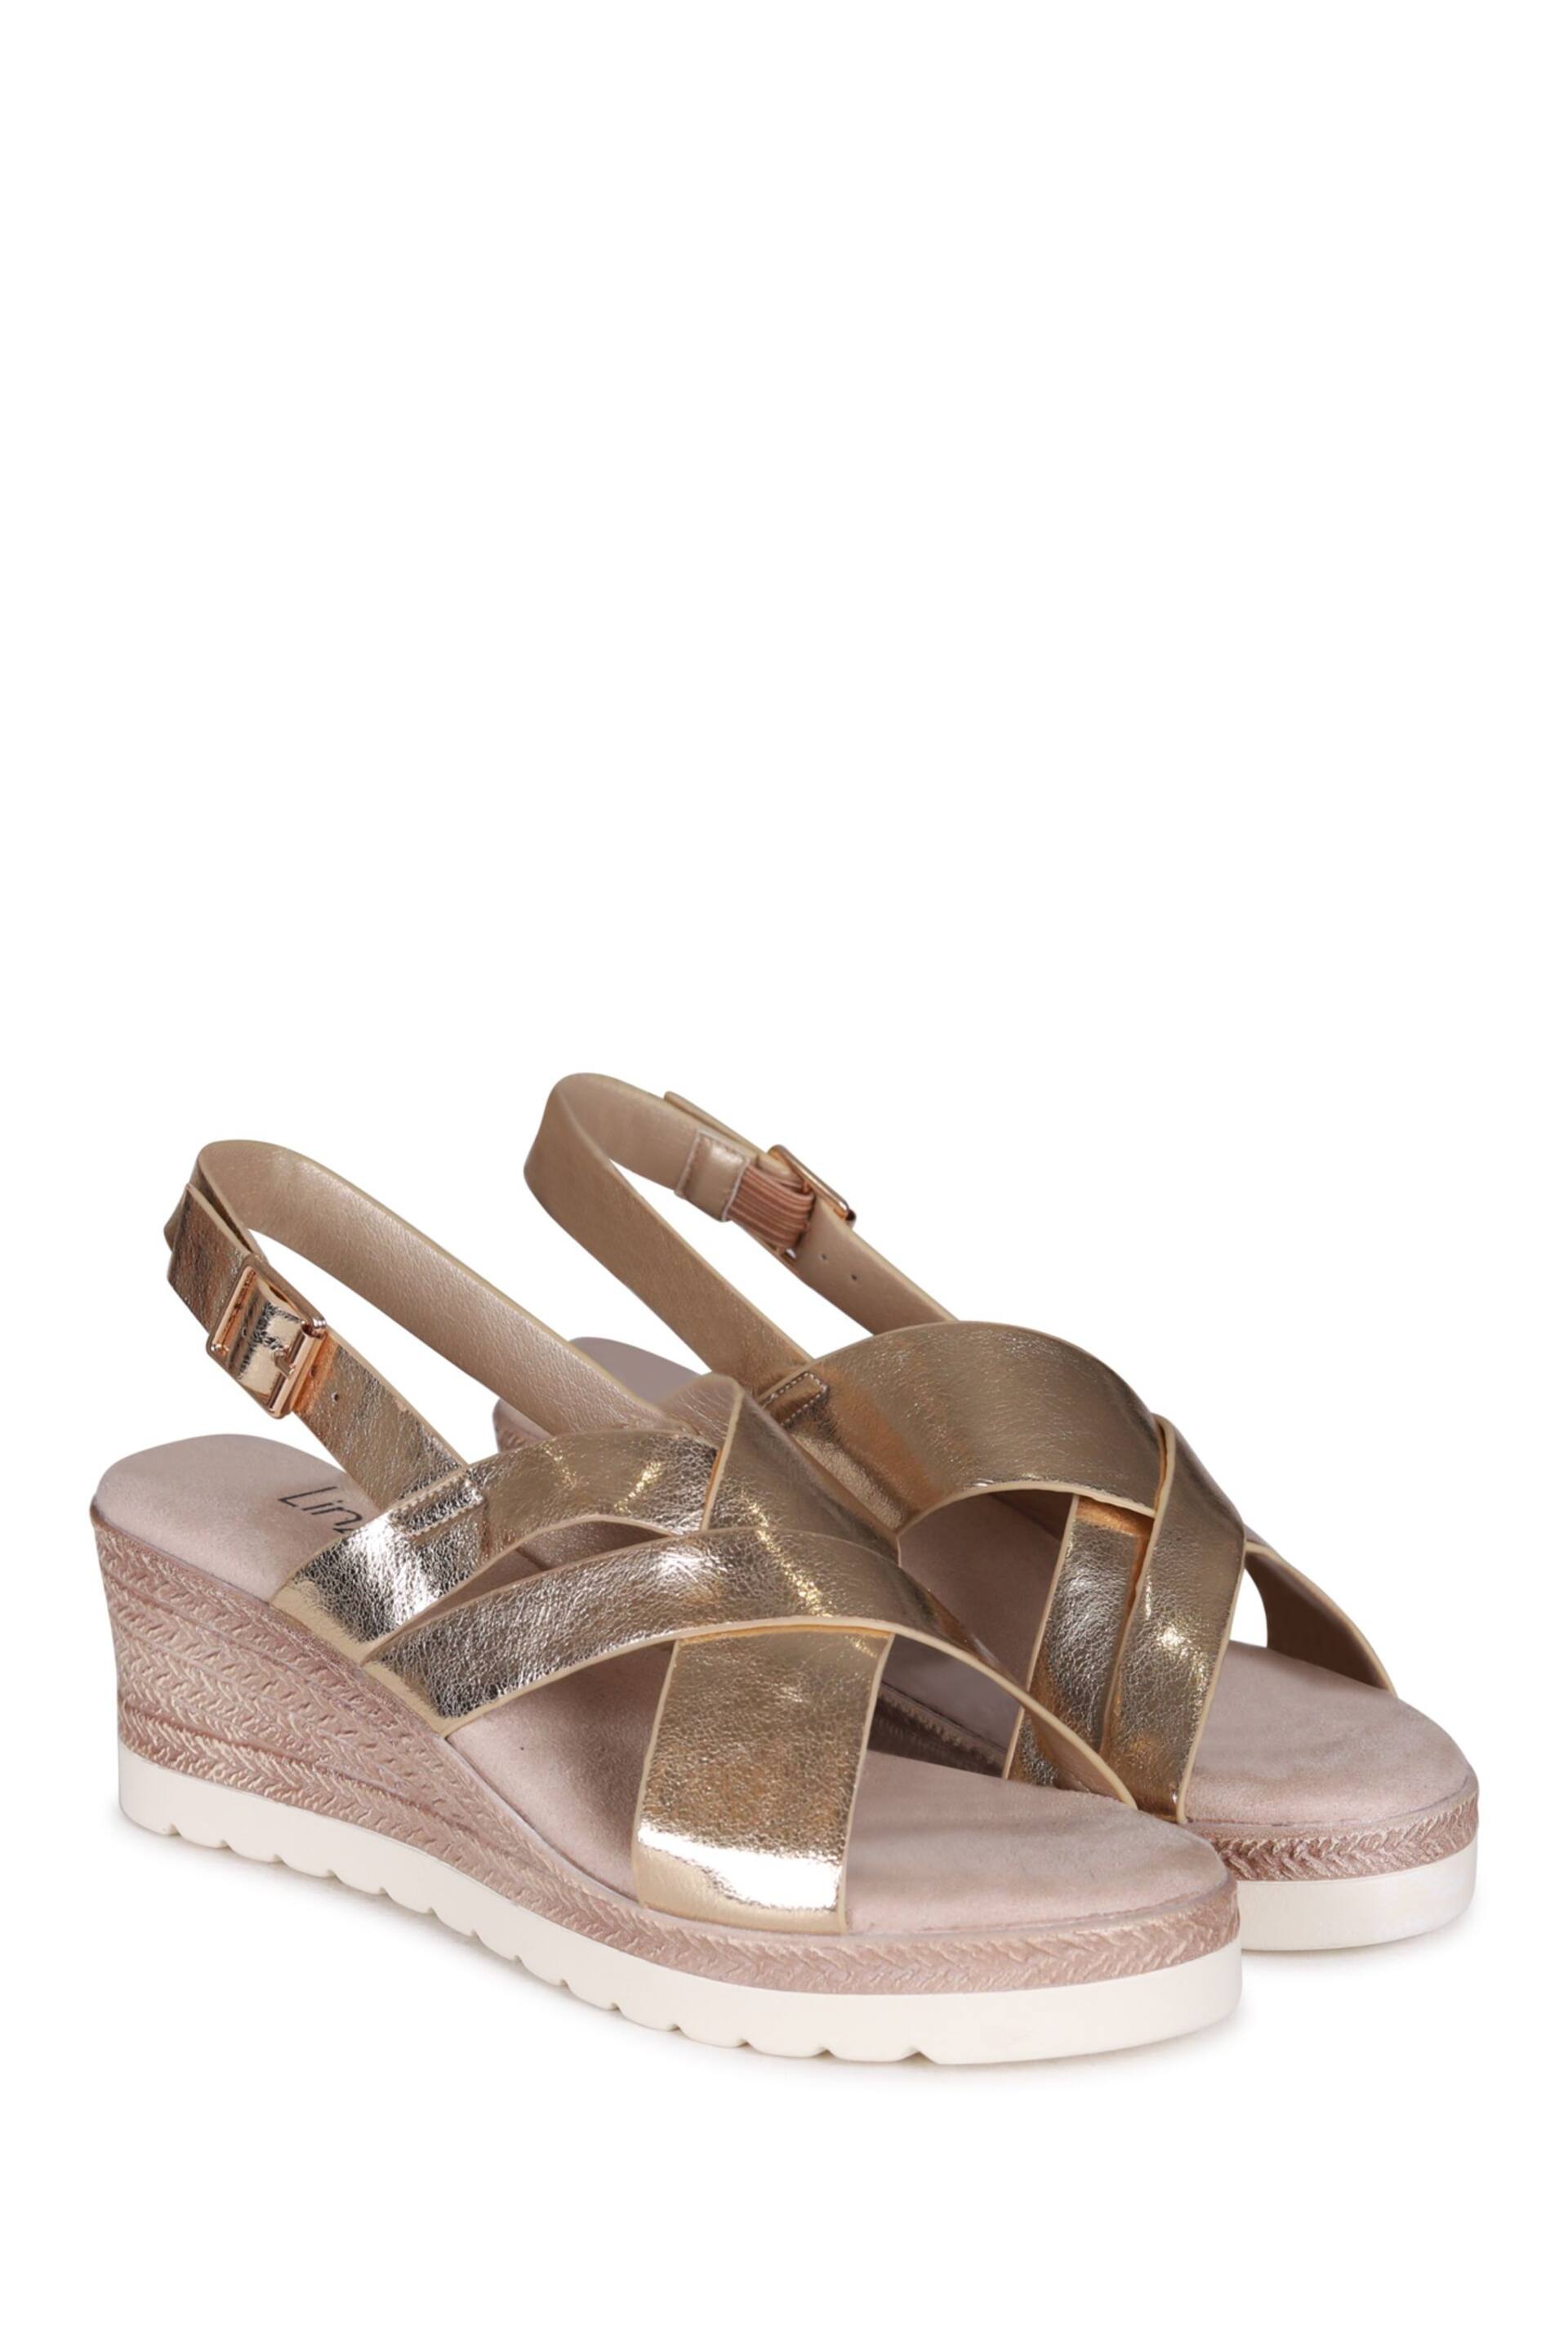 Linzi Gold Myla Sling Back Wedge Espadrille Sandals With Cross Over Front Strap - Image 4 of 4